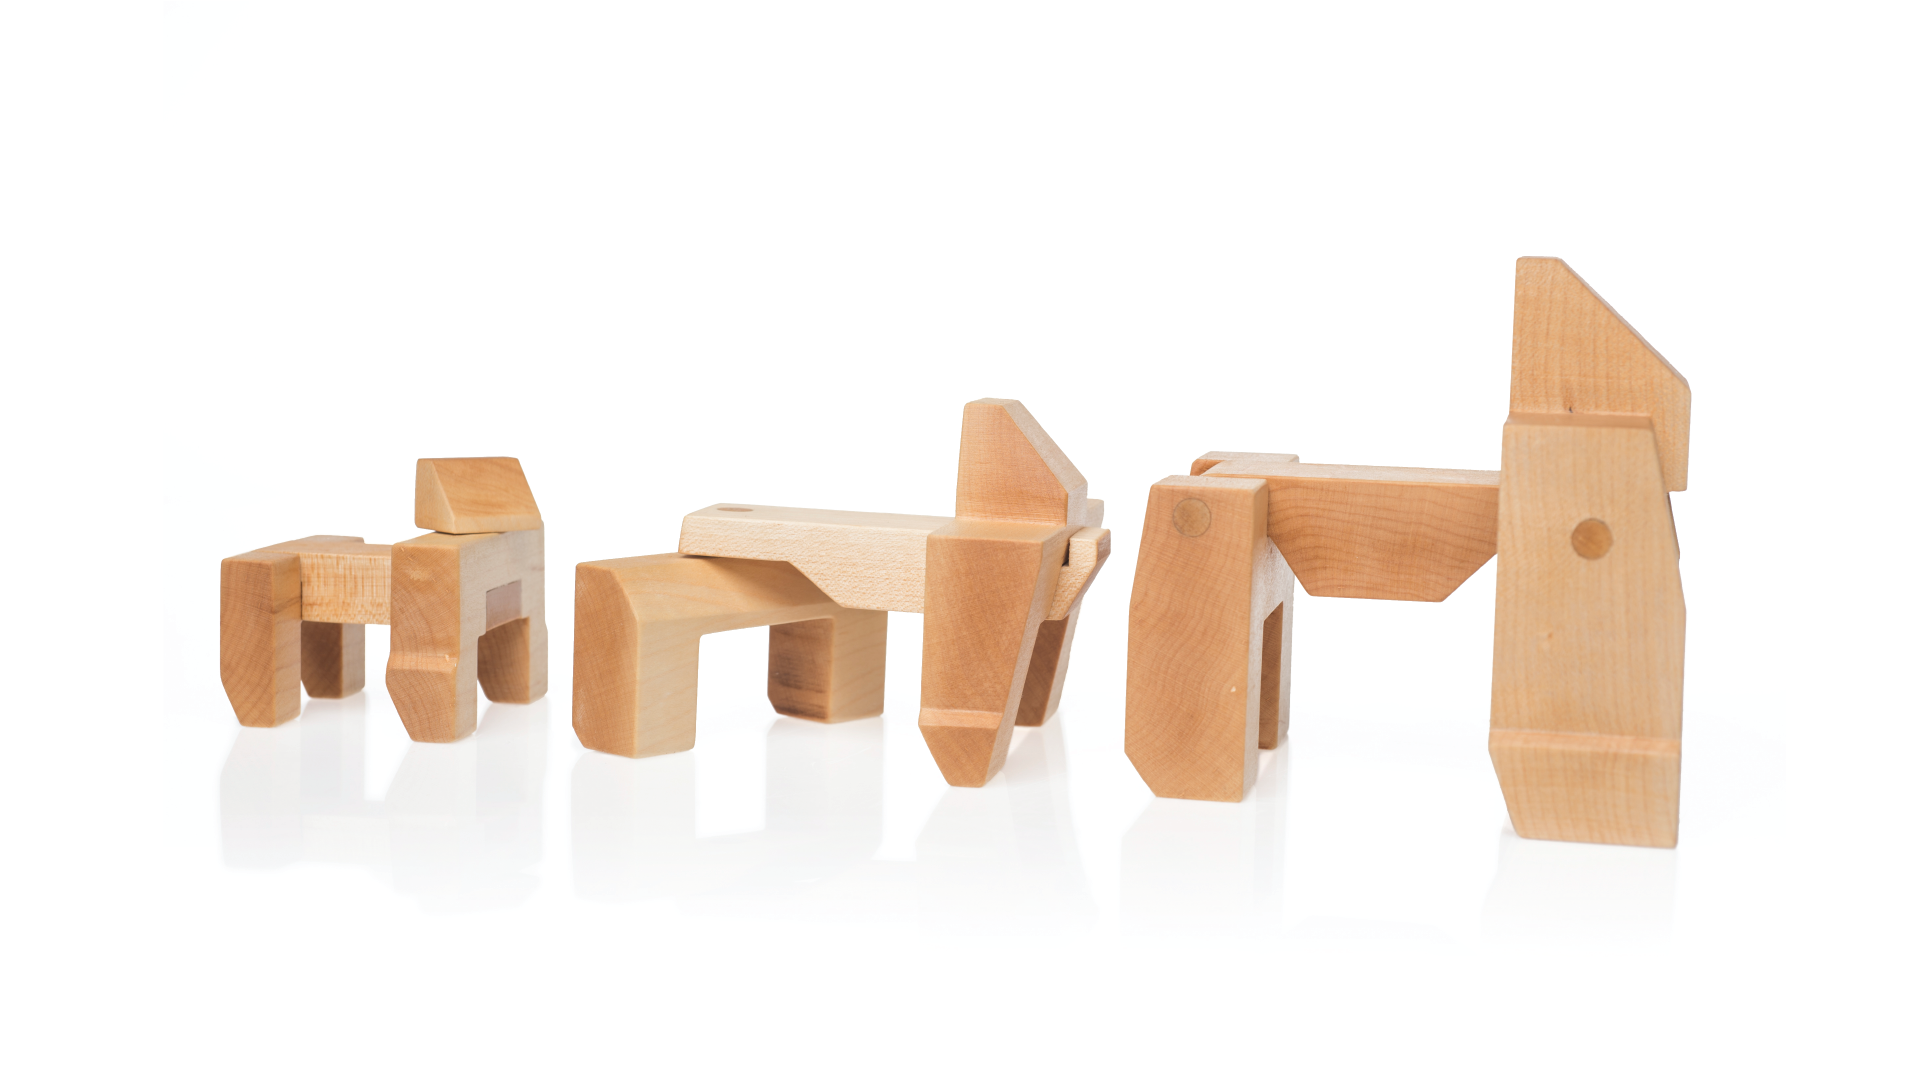 Wooden blocks stacked together creating three different sizes and forms of gorillas.